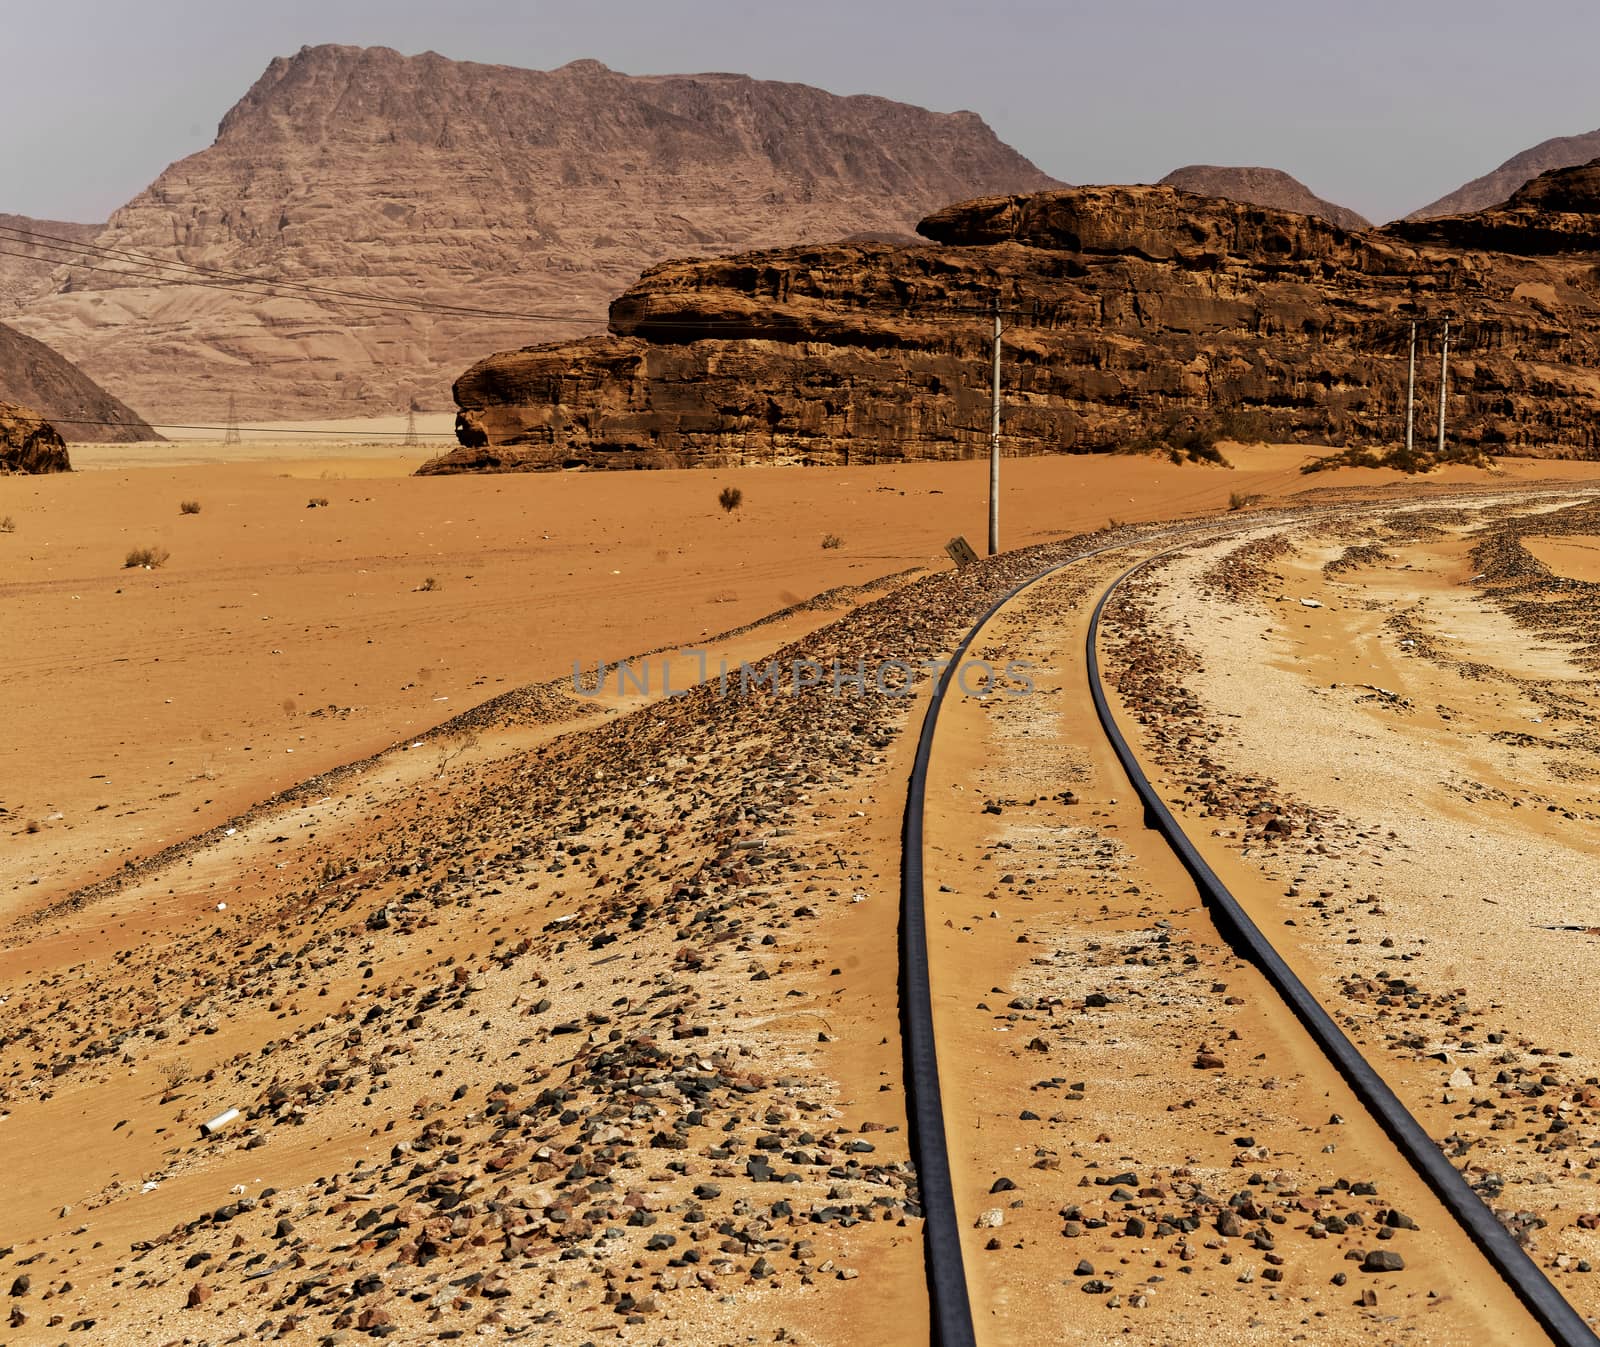 One-track railway with large rock formations in the background, in the desert of Wadi Rum, Jordan by geogif